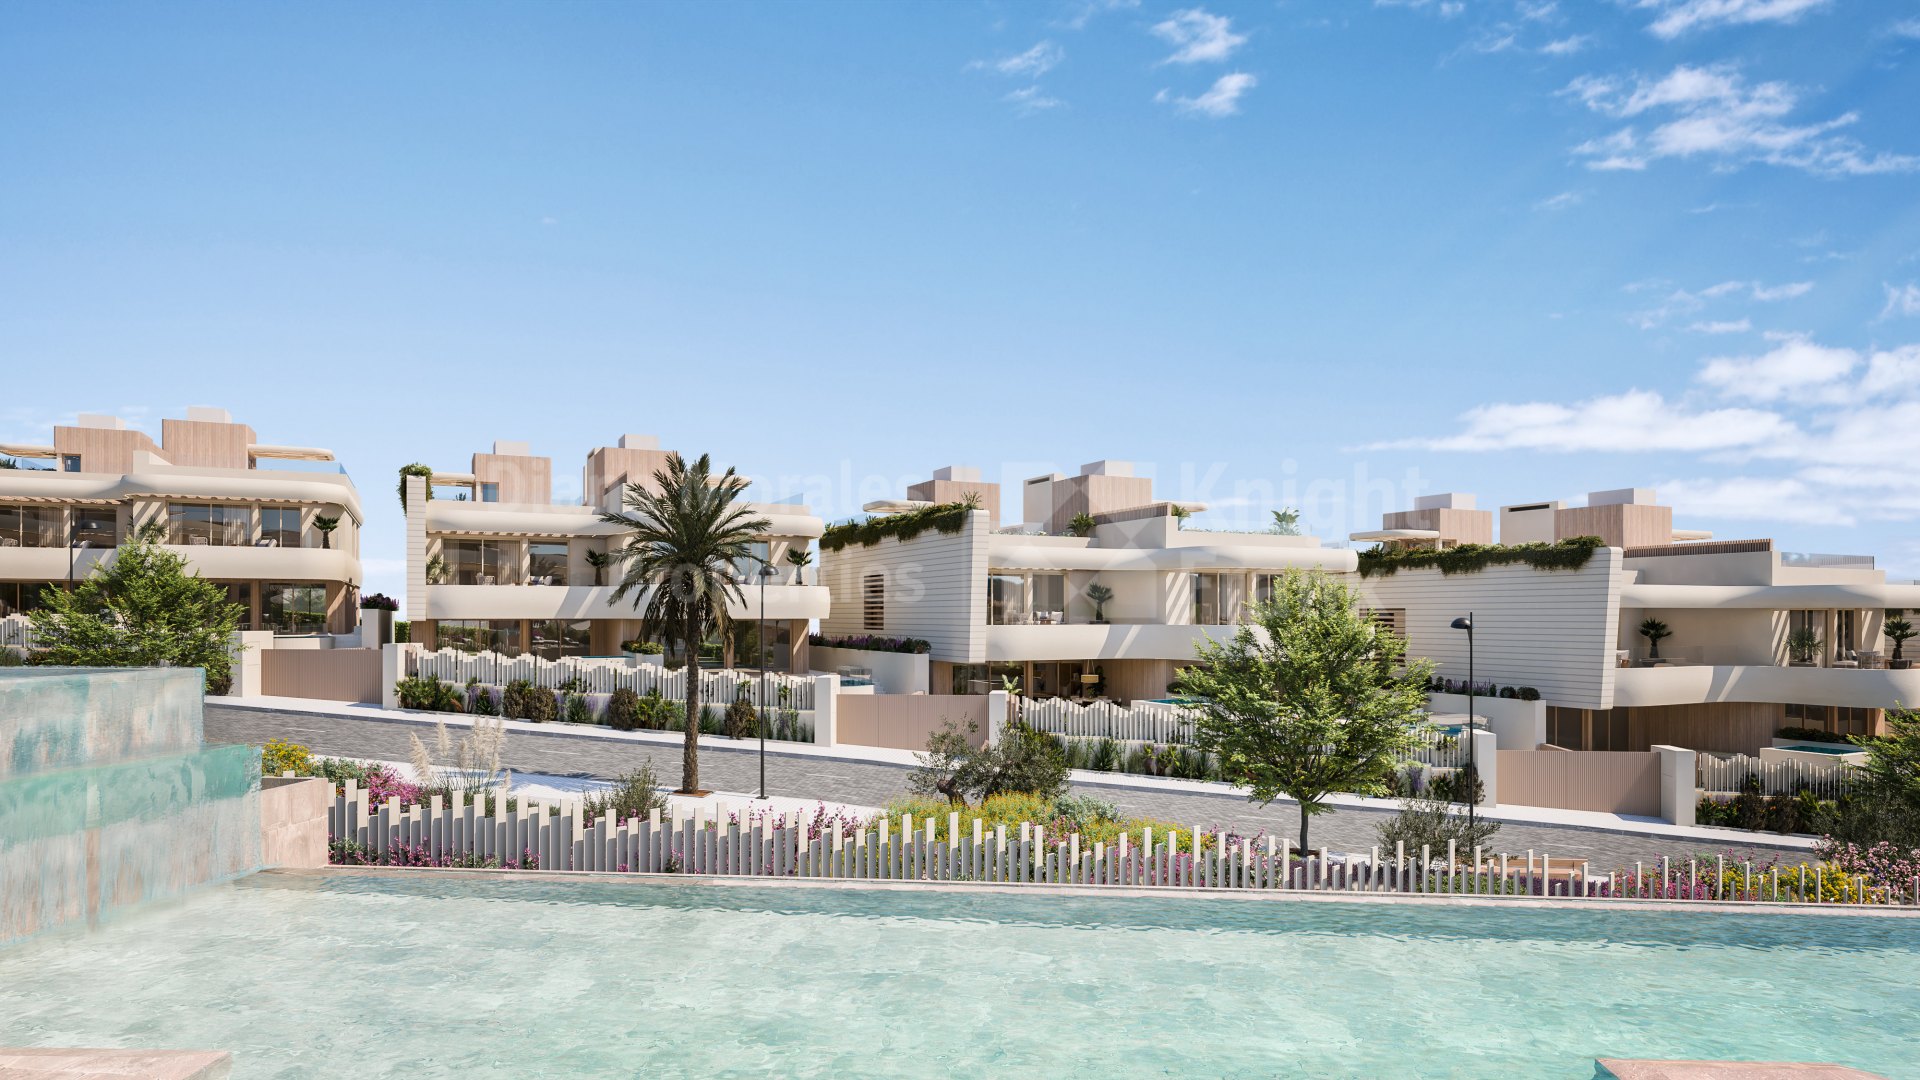 Las Chapas, Two-bedroom apartment in Dunique, steps from the beach